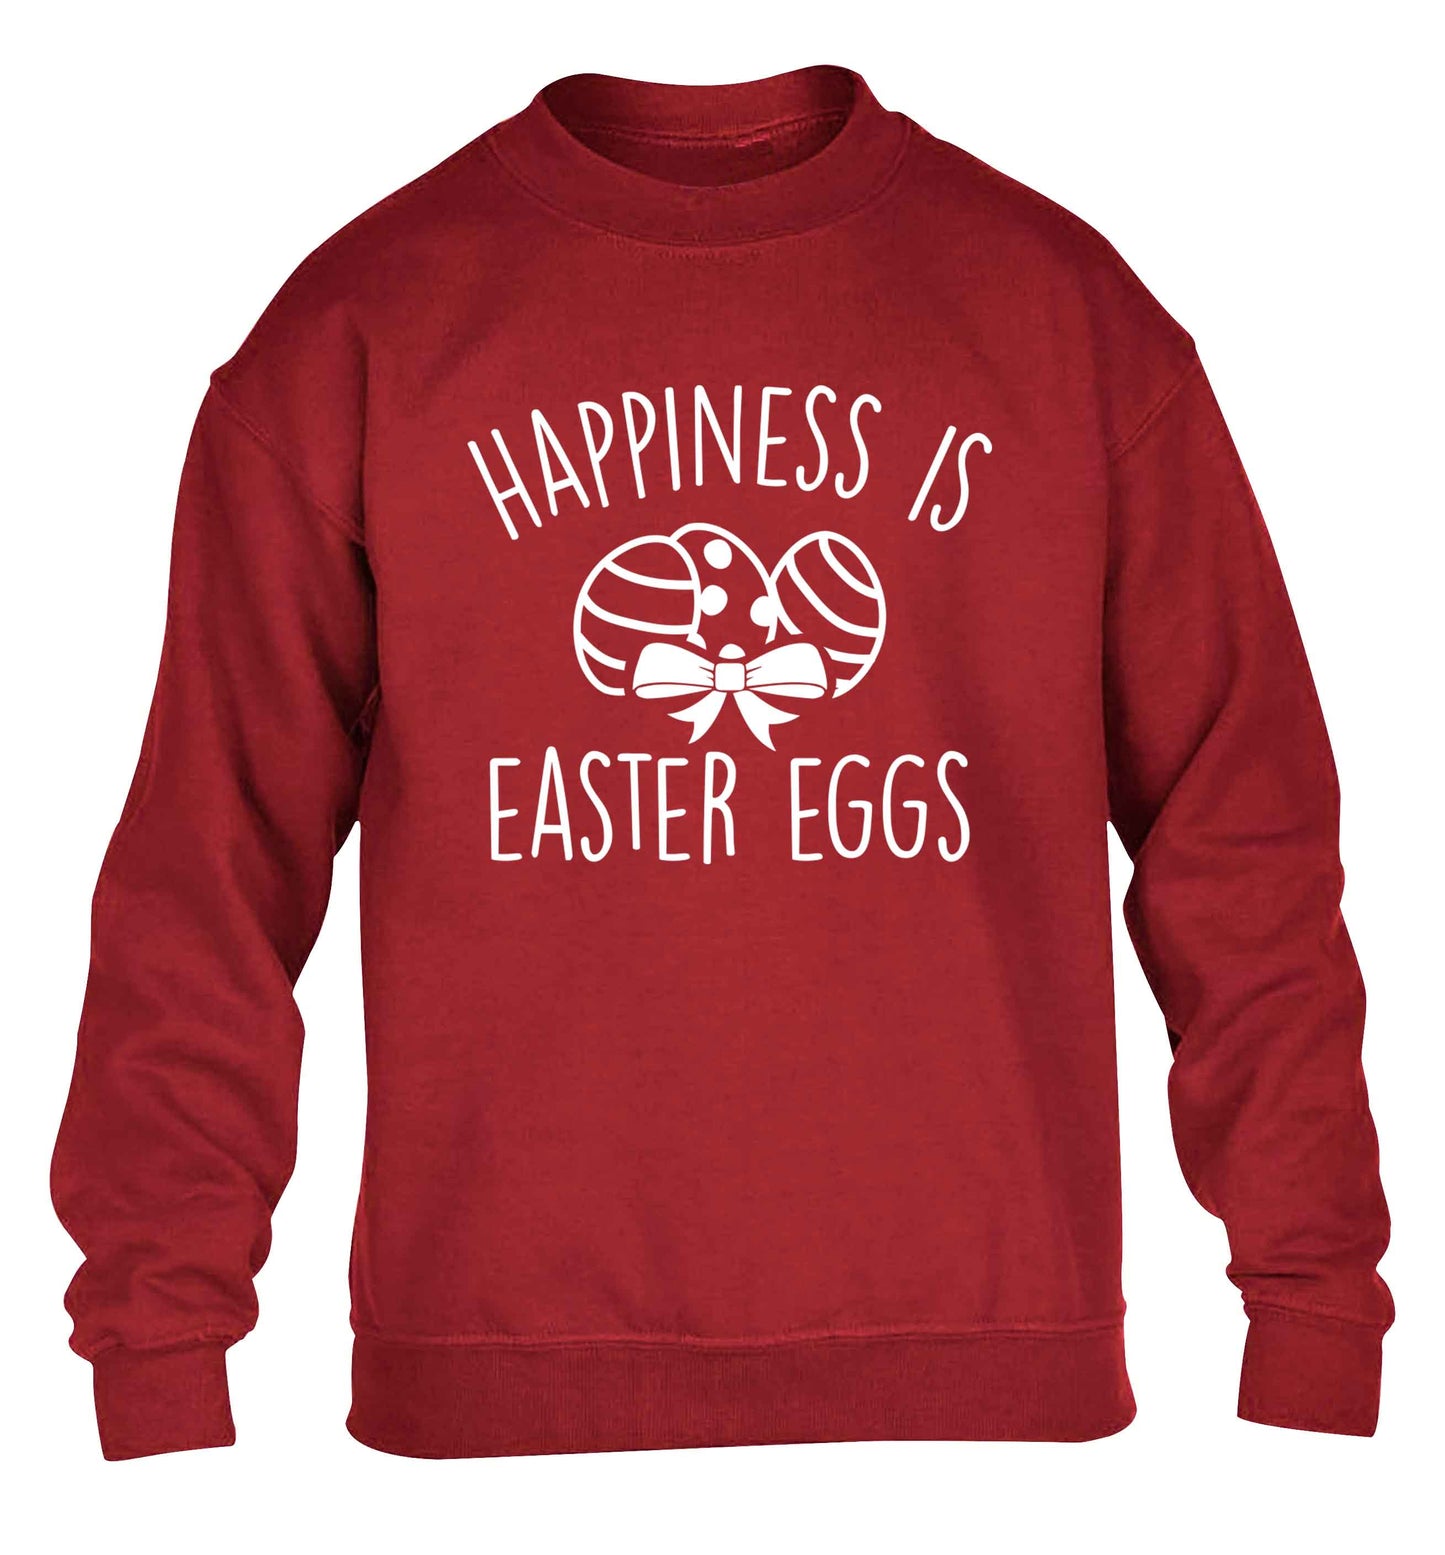 Happiness is Easter eggs children's grey sweater 12-13 Years